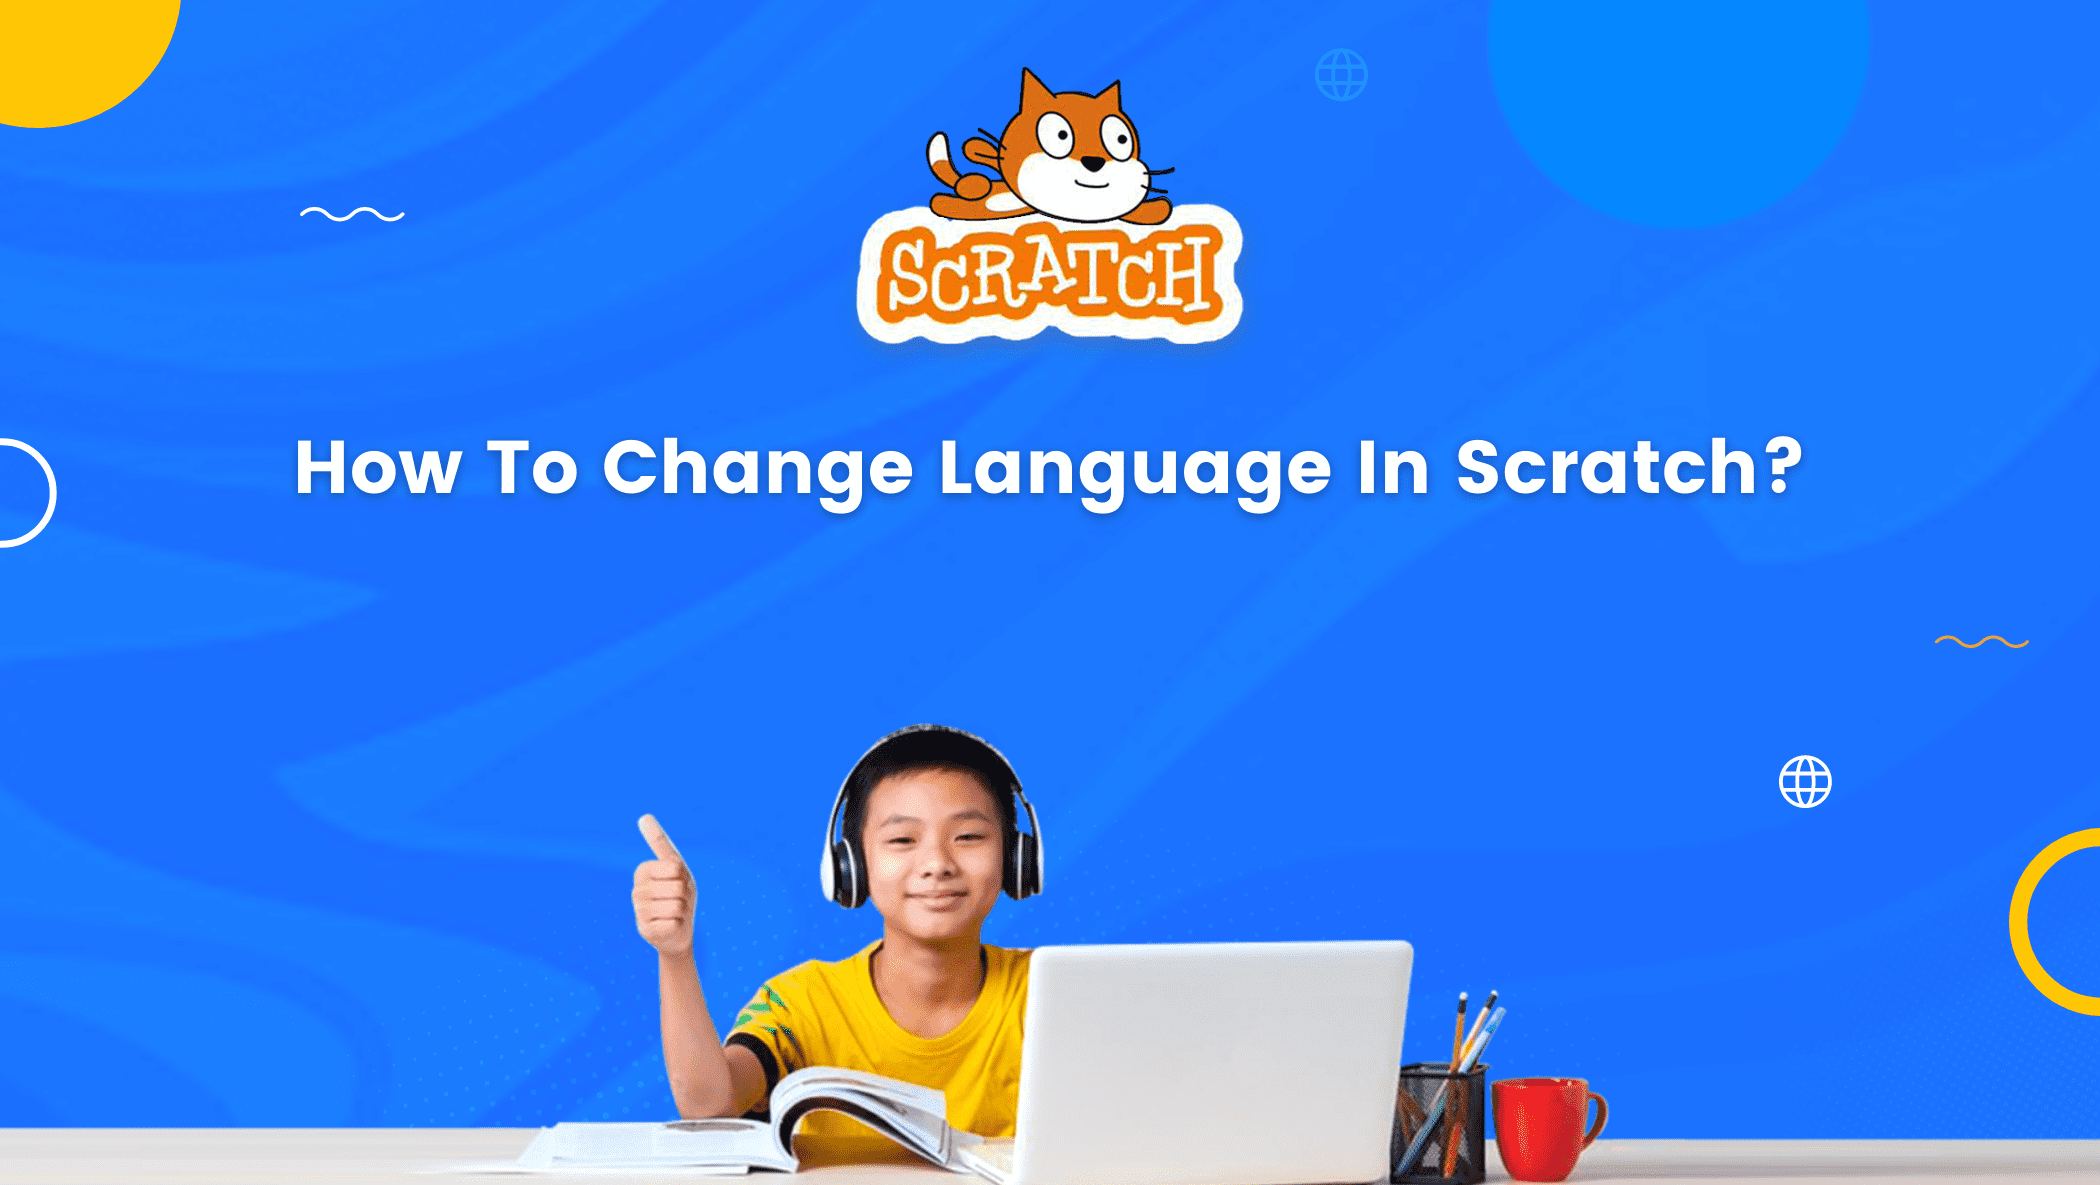 How To Change Language In Scratch